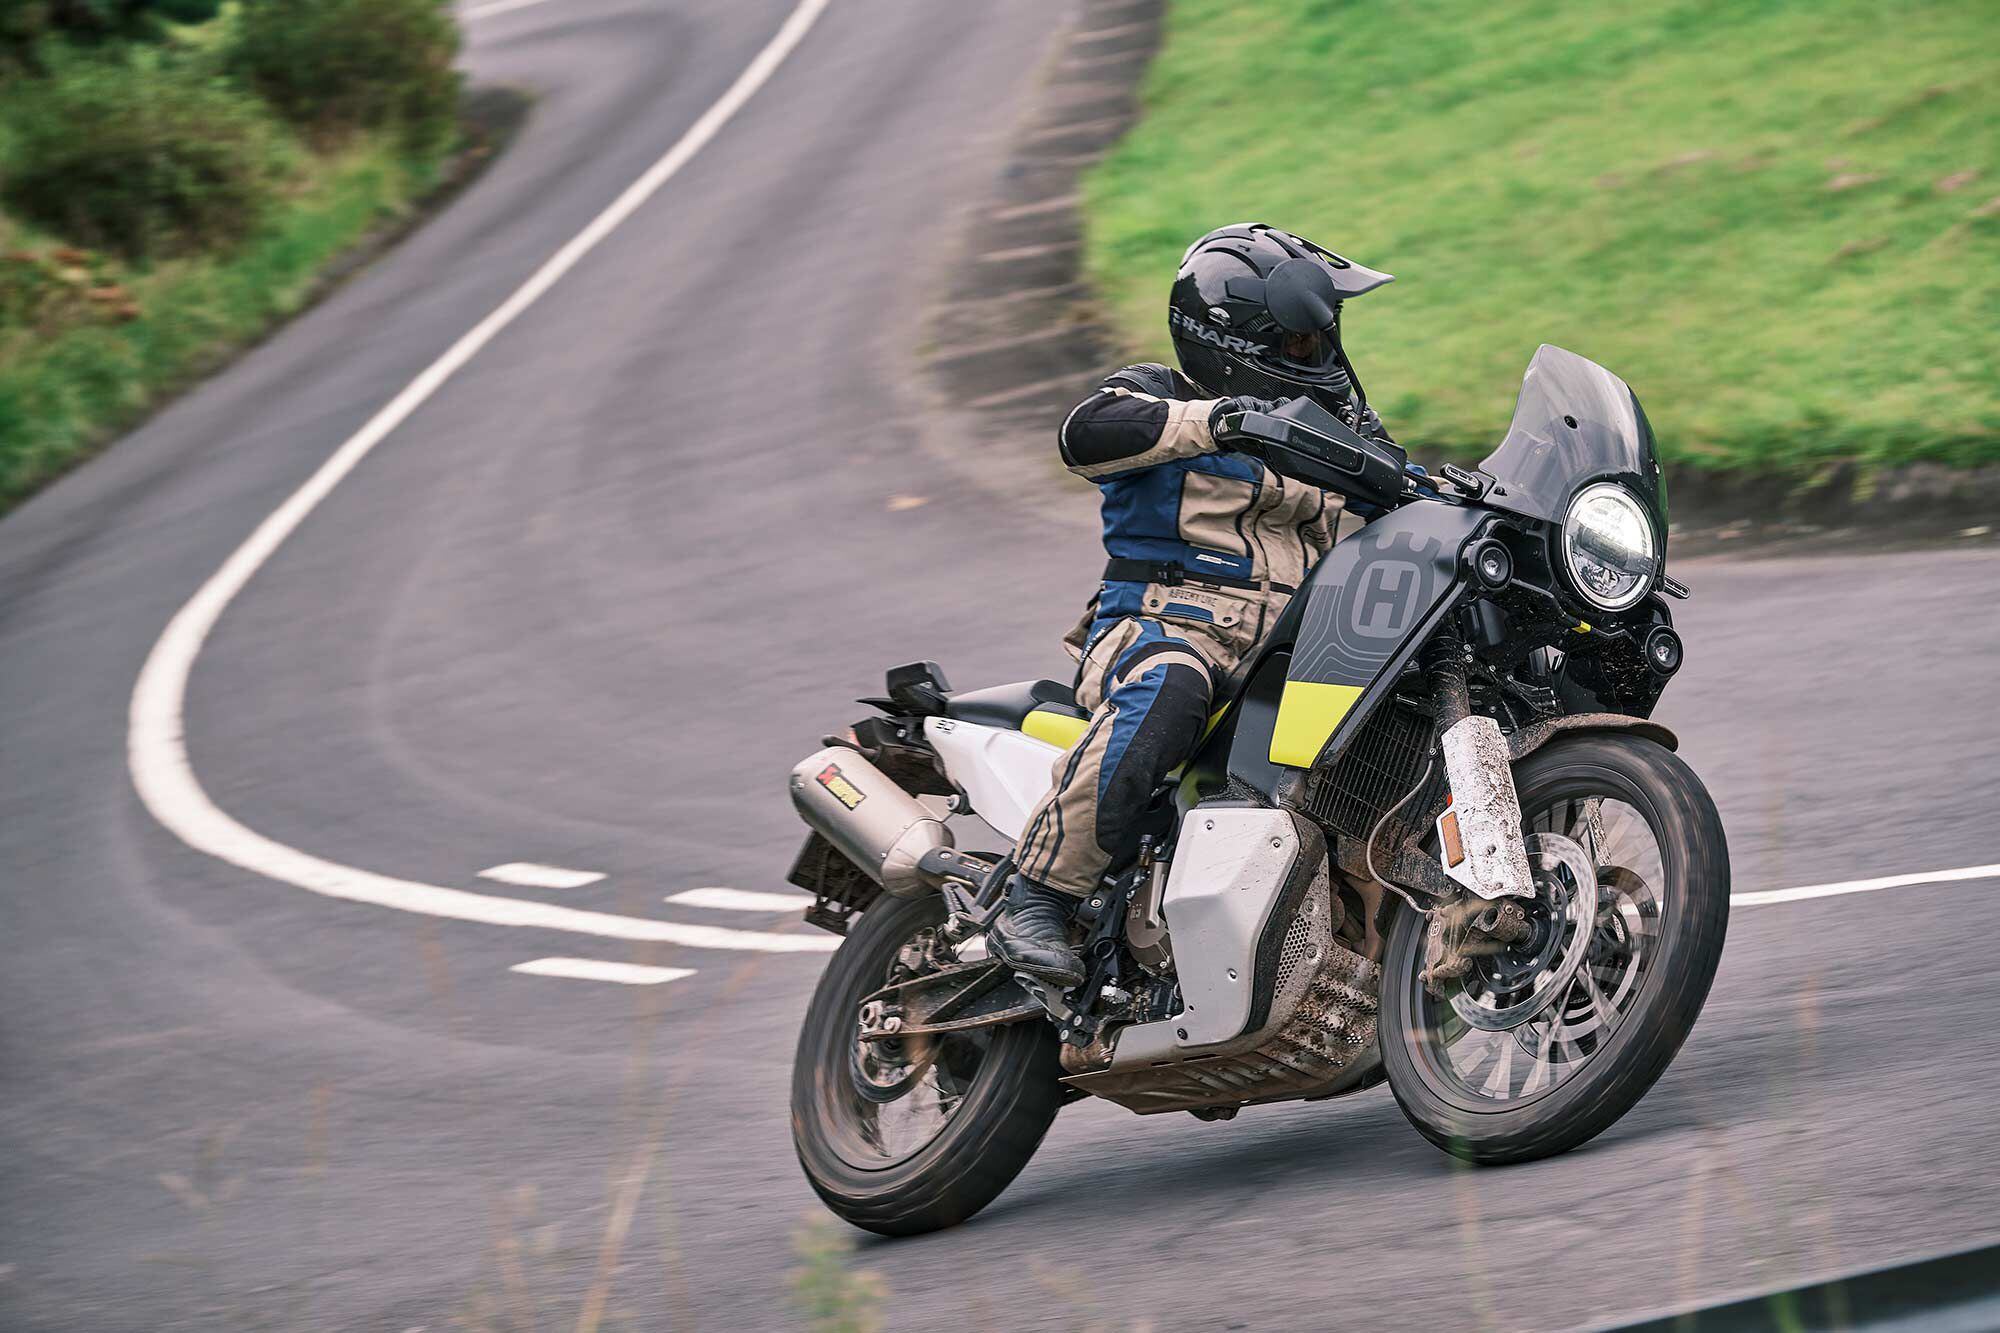 As you would expect for a bike ready to take on the world, there is a long list of travel accessories, from luggage, crash protection, and heated grips to an Akrapovič silencer.